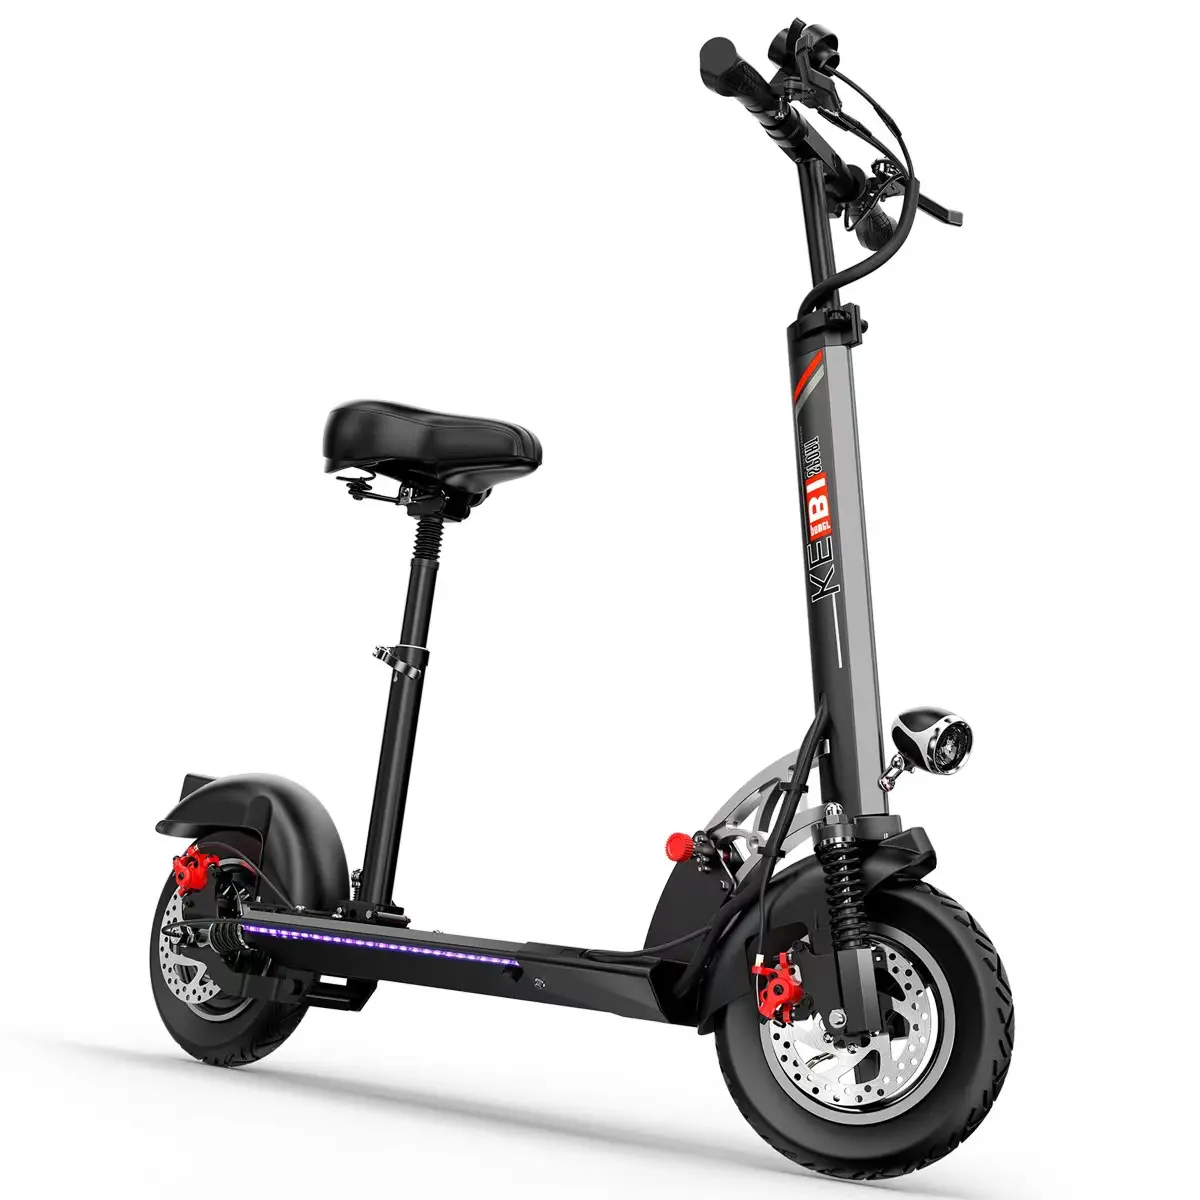 New Product Explosion self-balancing electric scooters electric scooter 2000w scooter electric 100 km/h